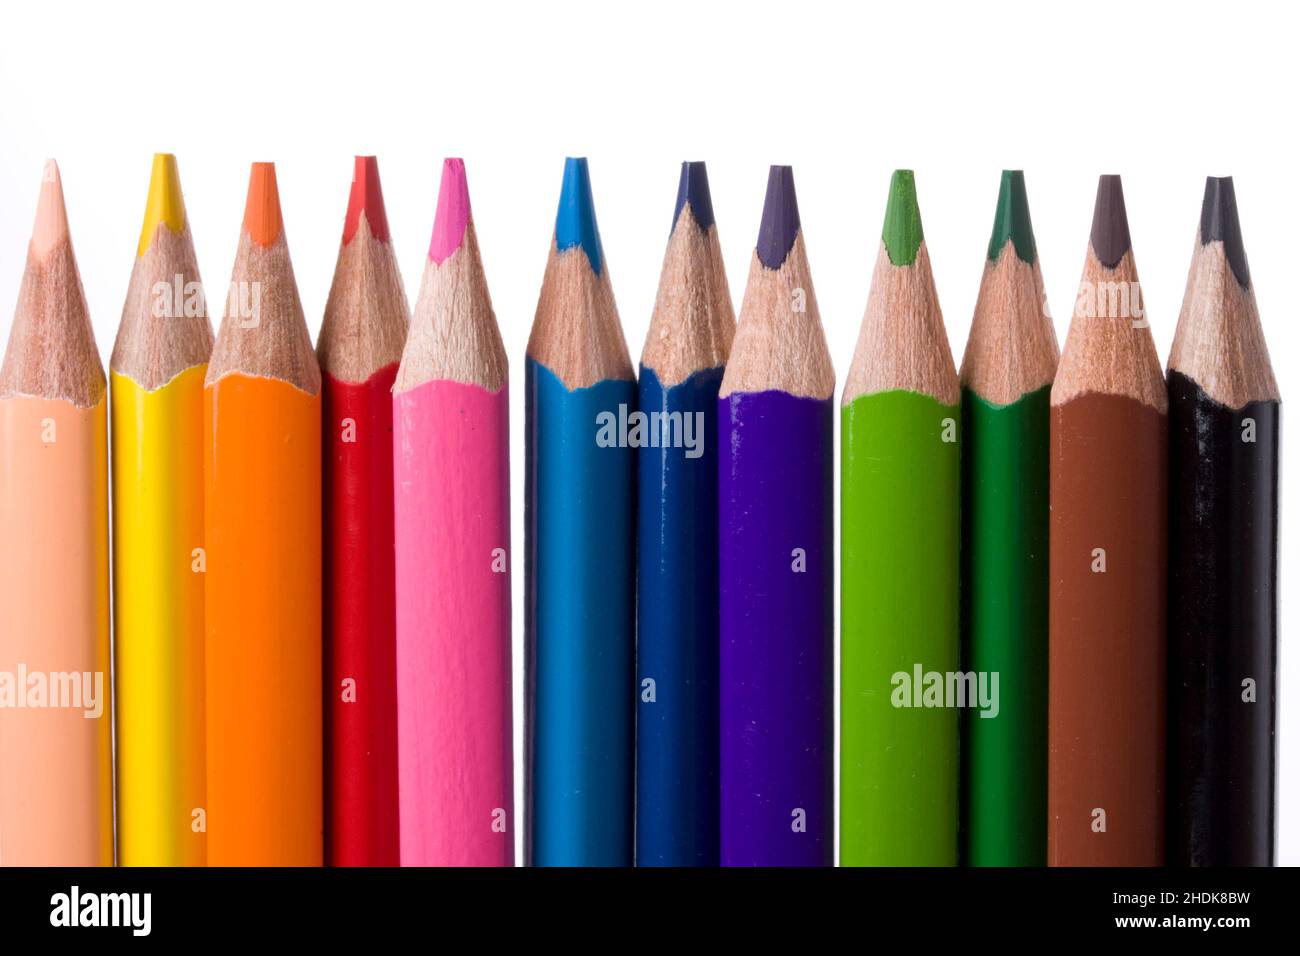 crayon, multi colored, wood pen, crayons, multi coloreds, wood pens Stock Photo